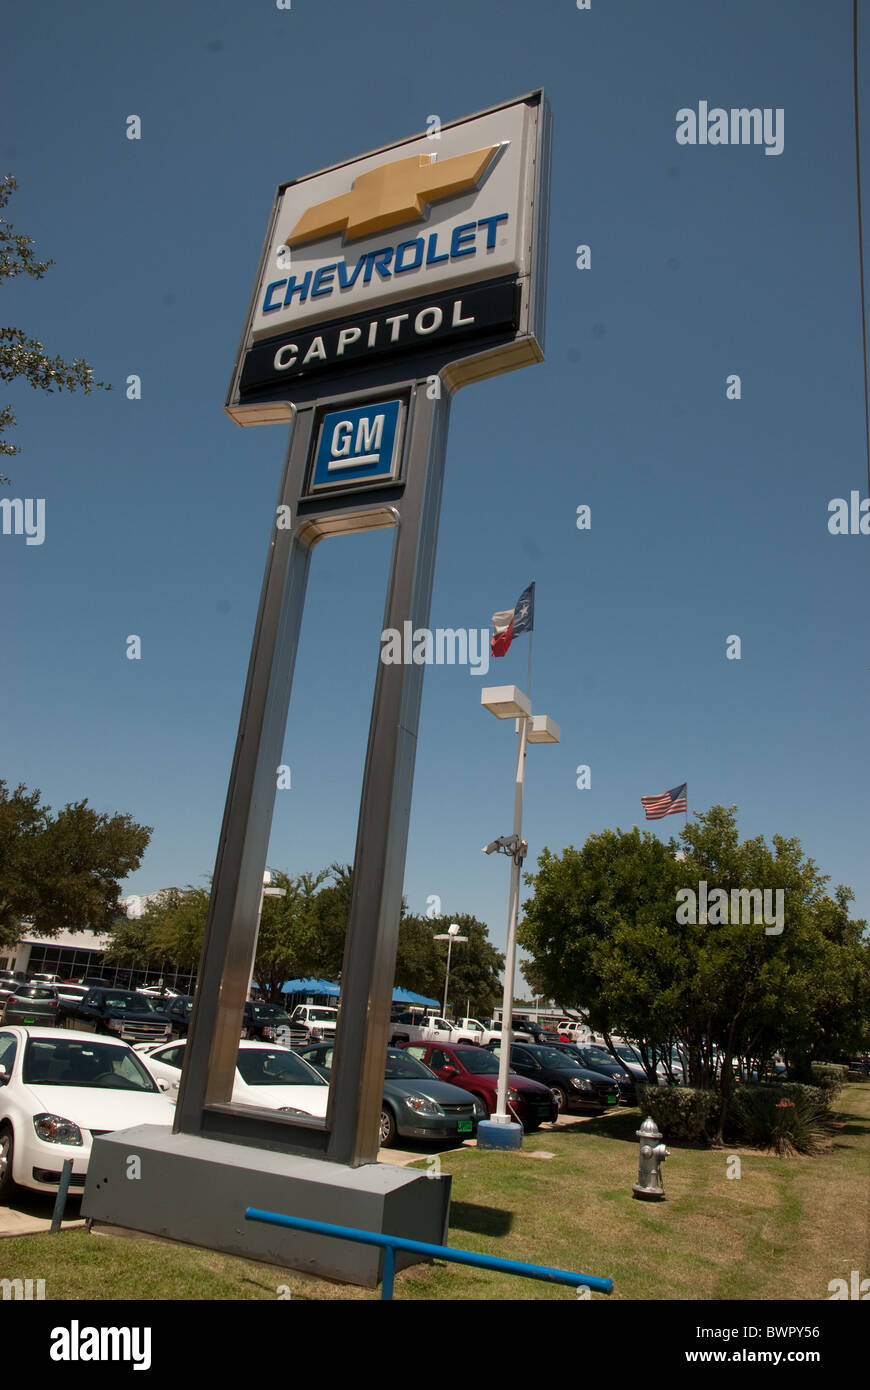 Large Capital Chevrolet sign on standards shows Chevy and General Motors logos in front of dealership in Austin, Texas, USA Stock Photo